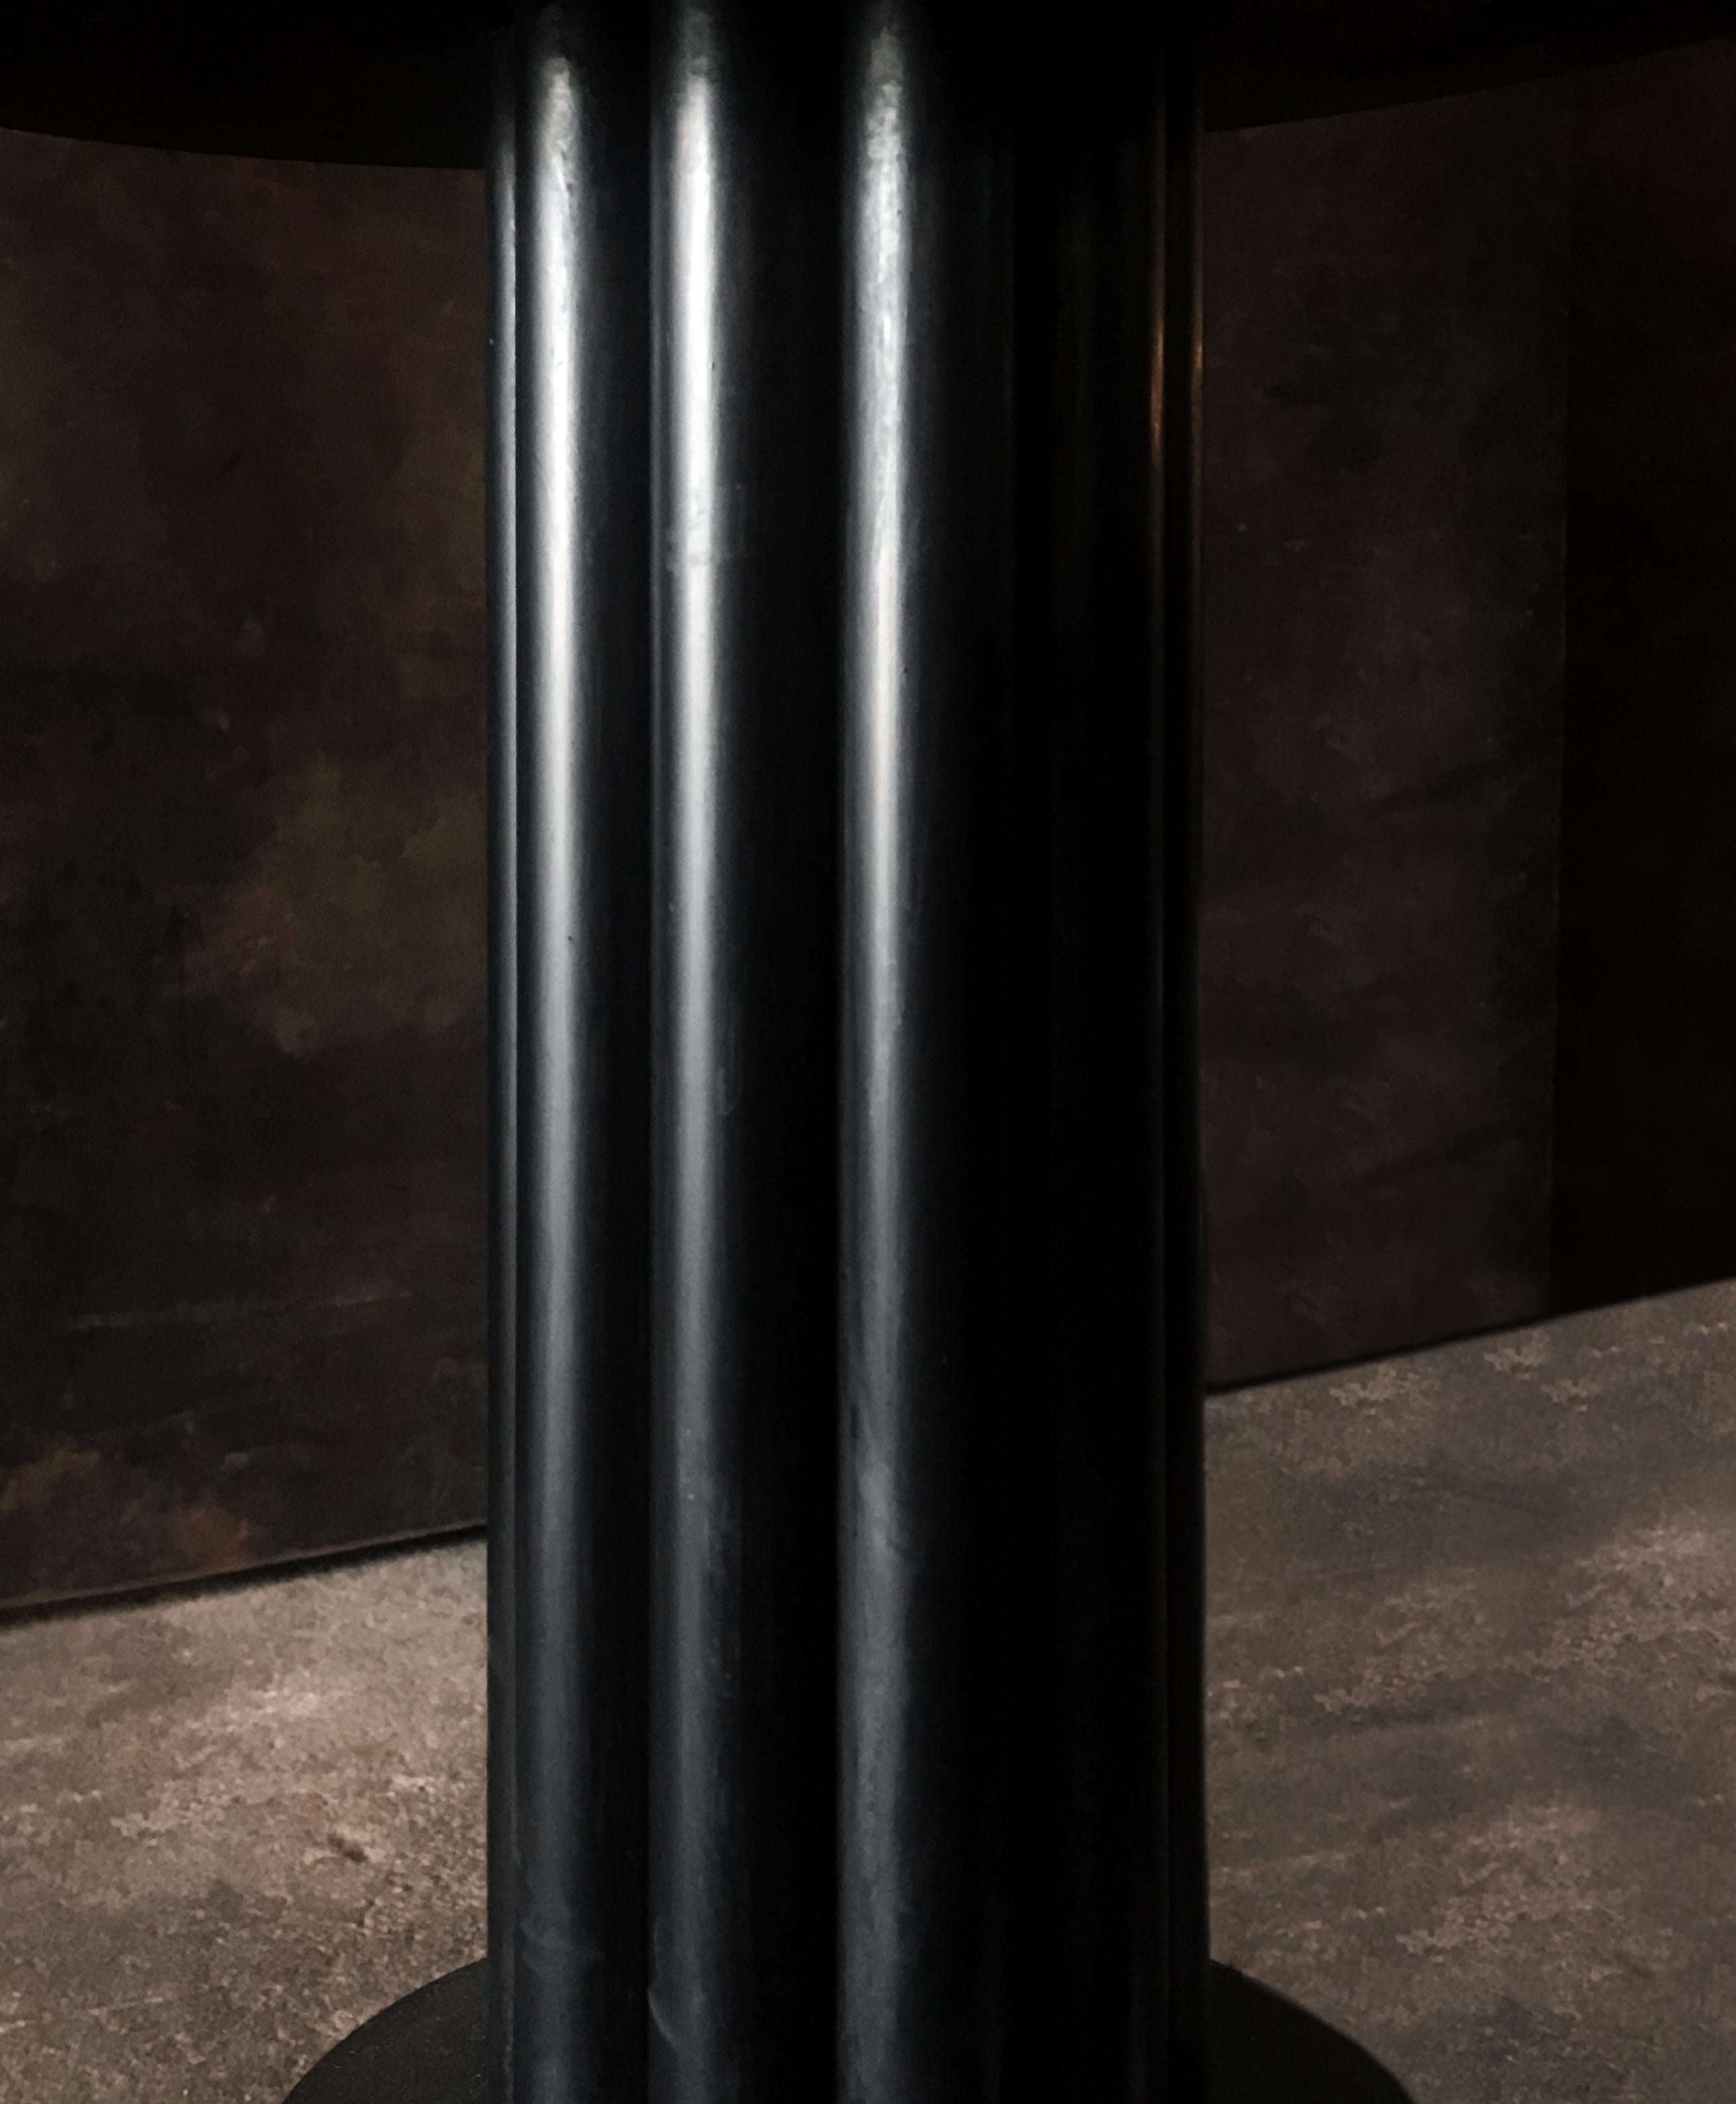 The (wh)ORE HAUS STUDIOS barstools are offered In two, adjustable heights  
 -Counter Height (adjustable from 23-28”) or 
- Bar Height (adjustable from 28-33”). 
 
Metal Finish: Bronze Rubbed Steel
 
-Each barstool weighs aprox 65lbs and has a 360